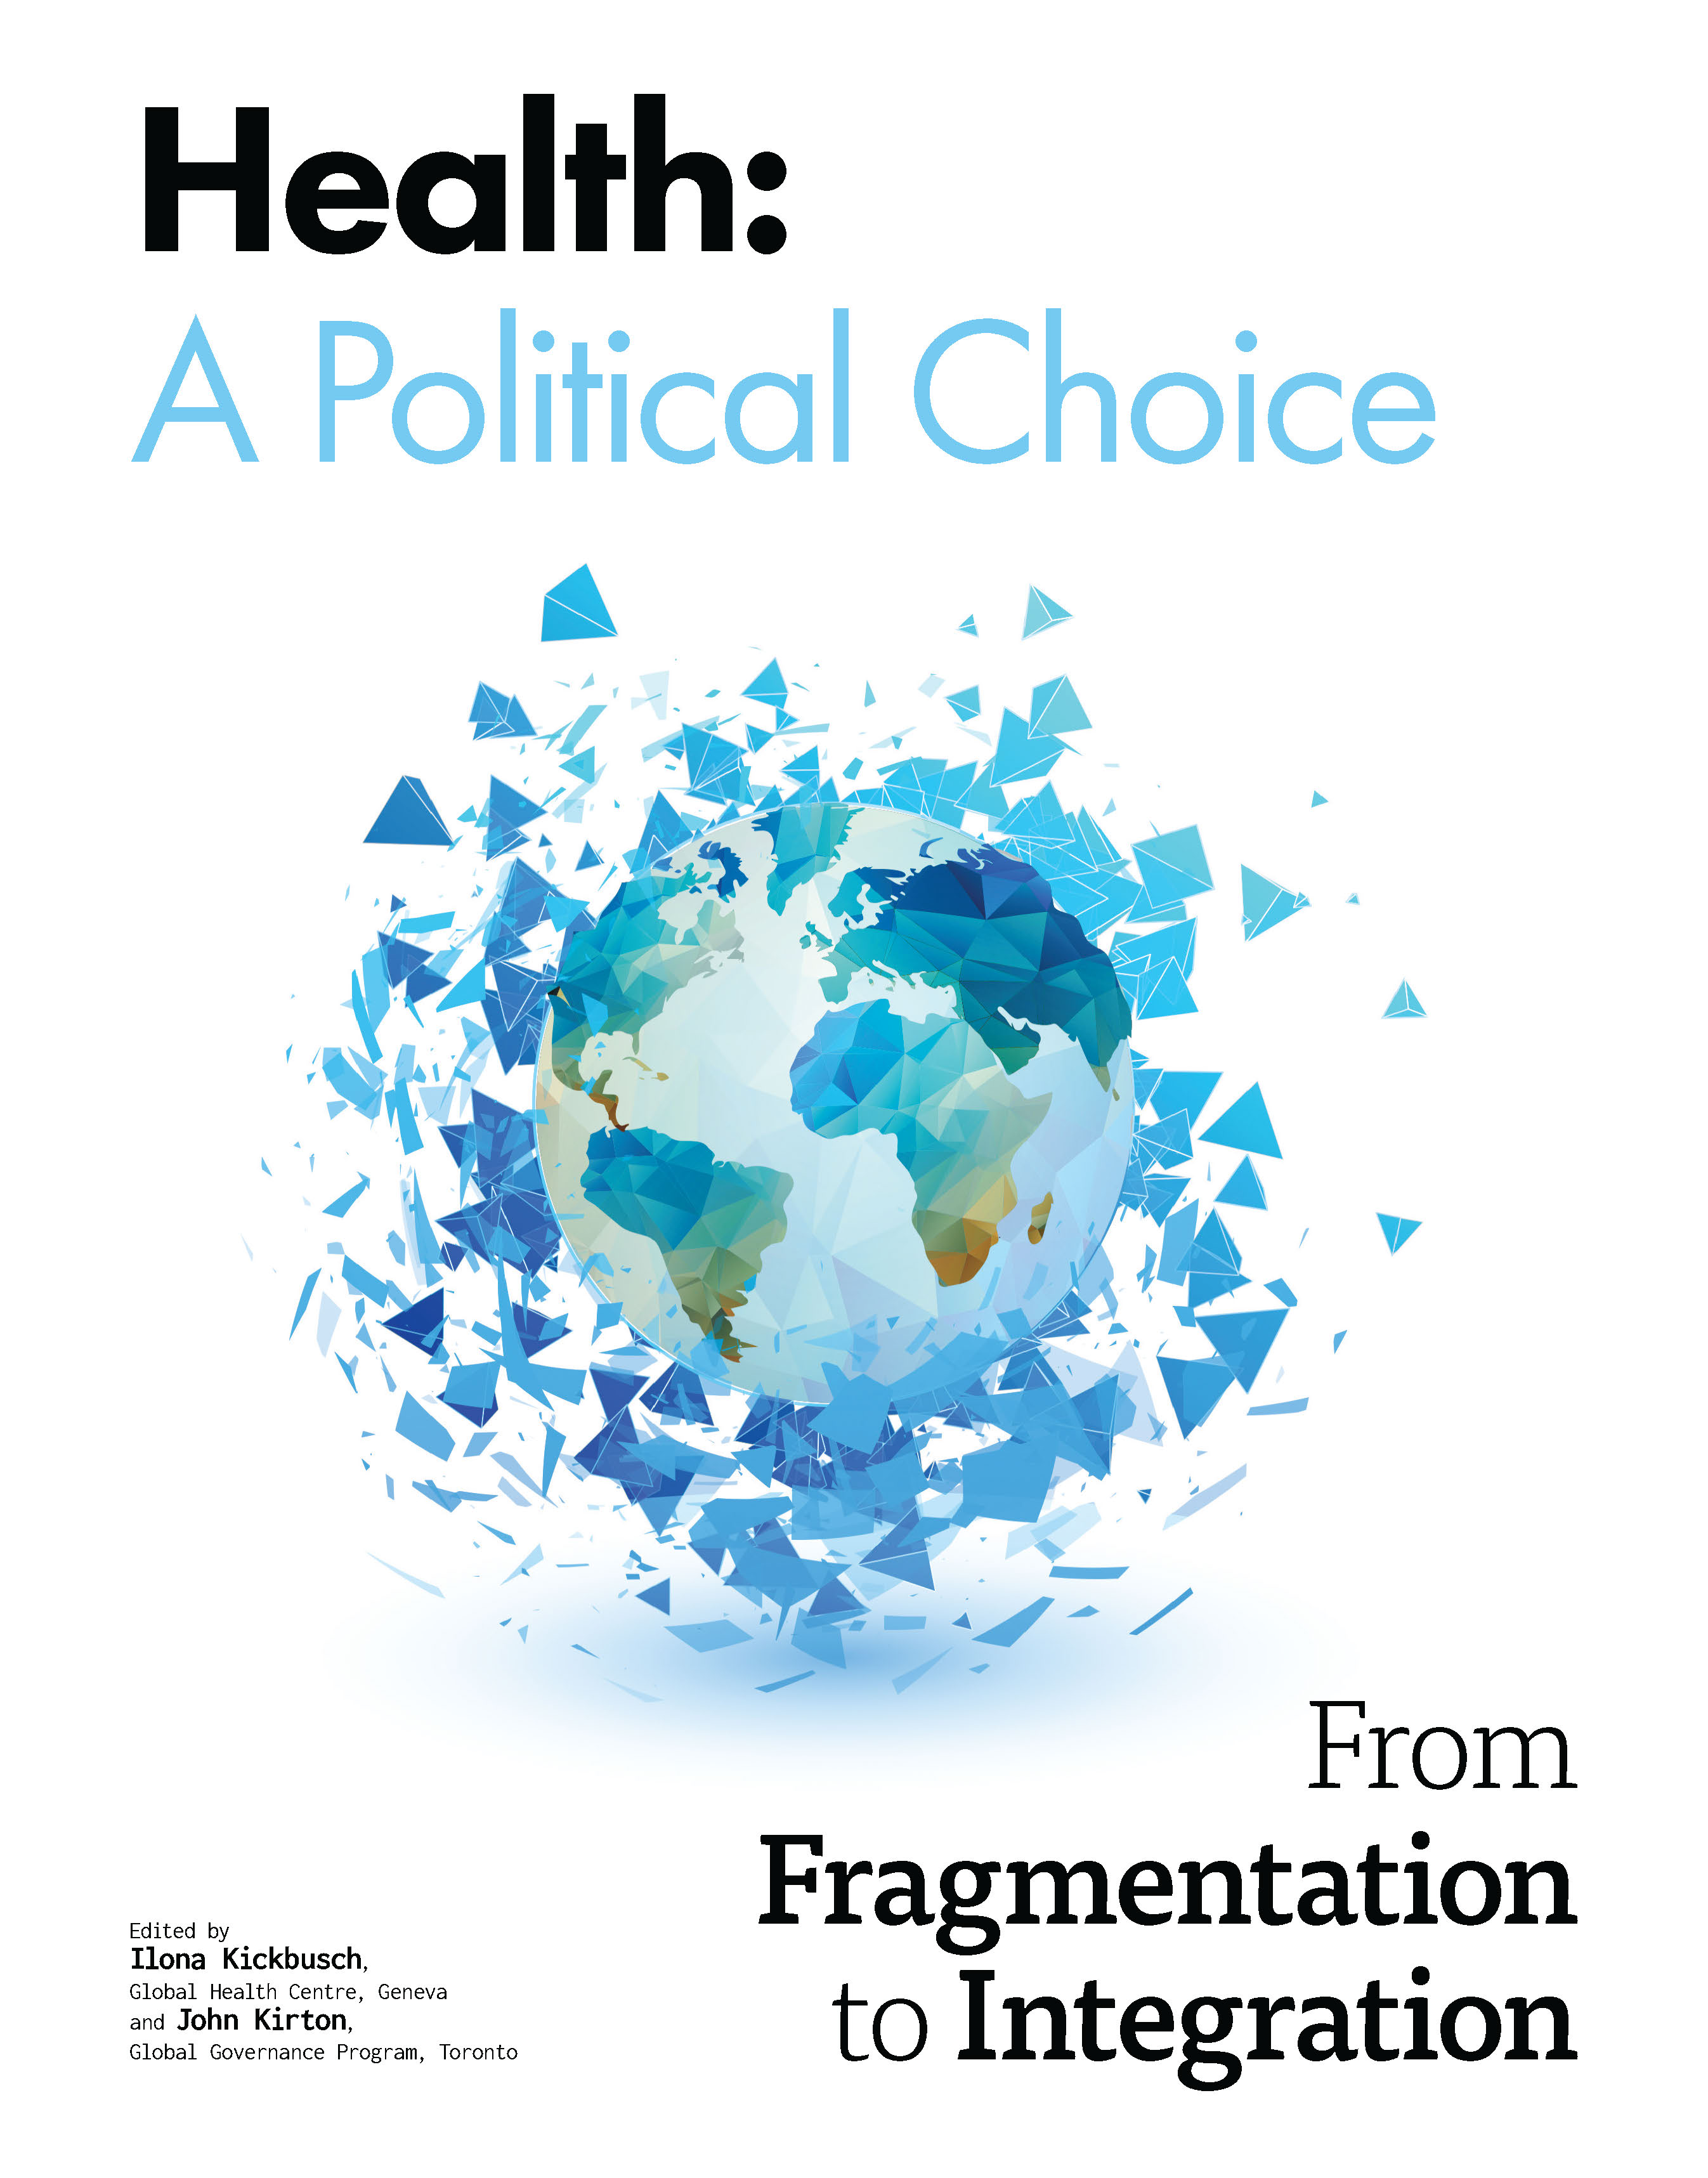 Health: A Political Choice – From Fragmentation to Integration